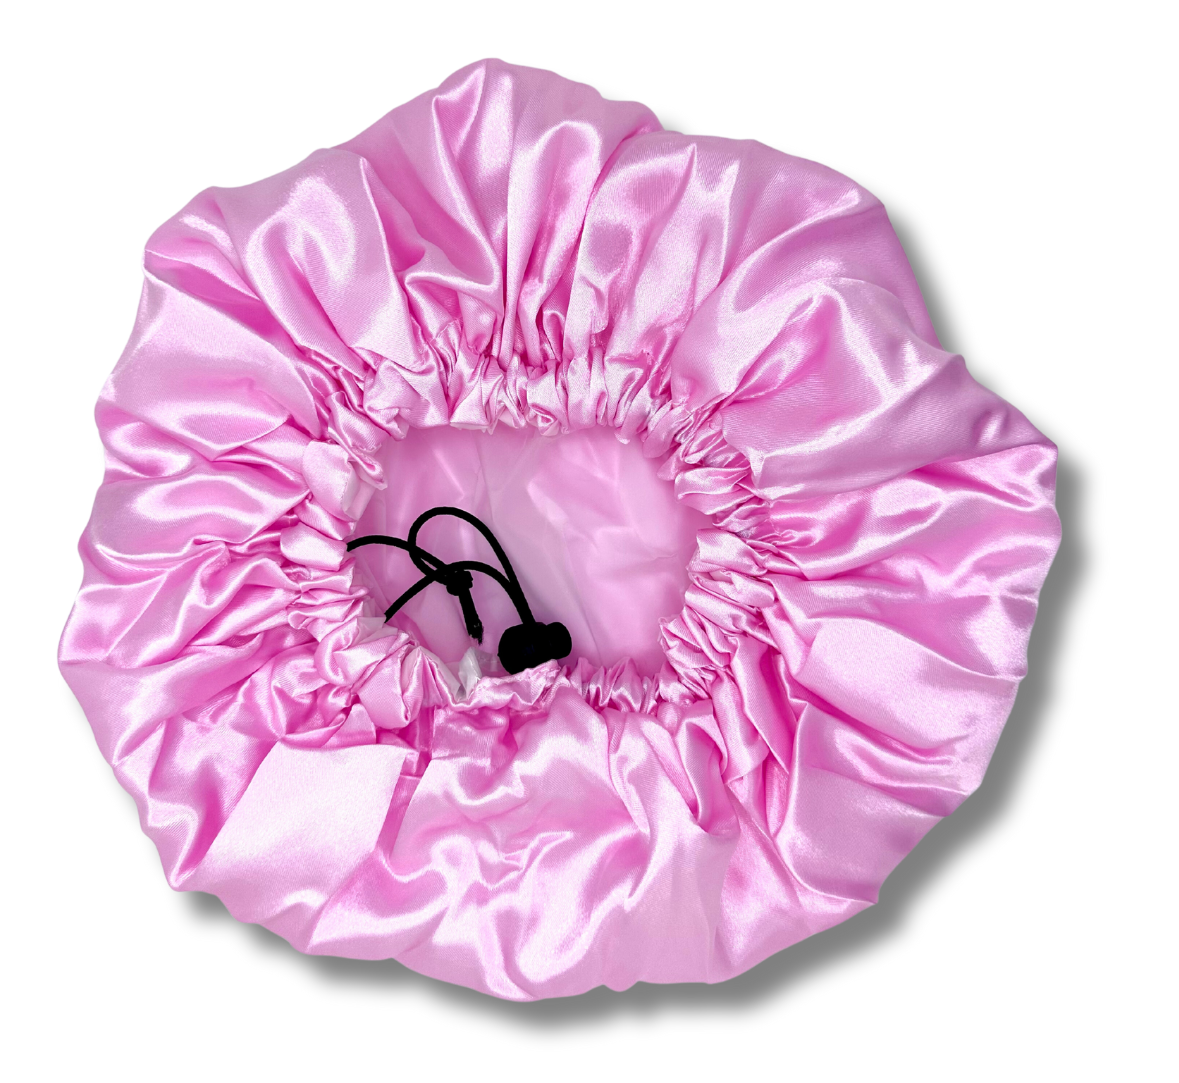 The Adjustable Satin Lined Luxury Shower Cap